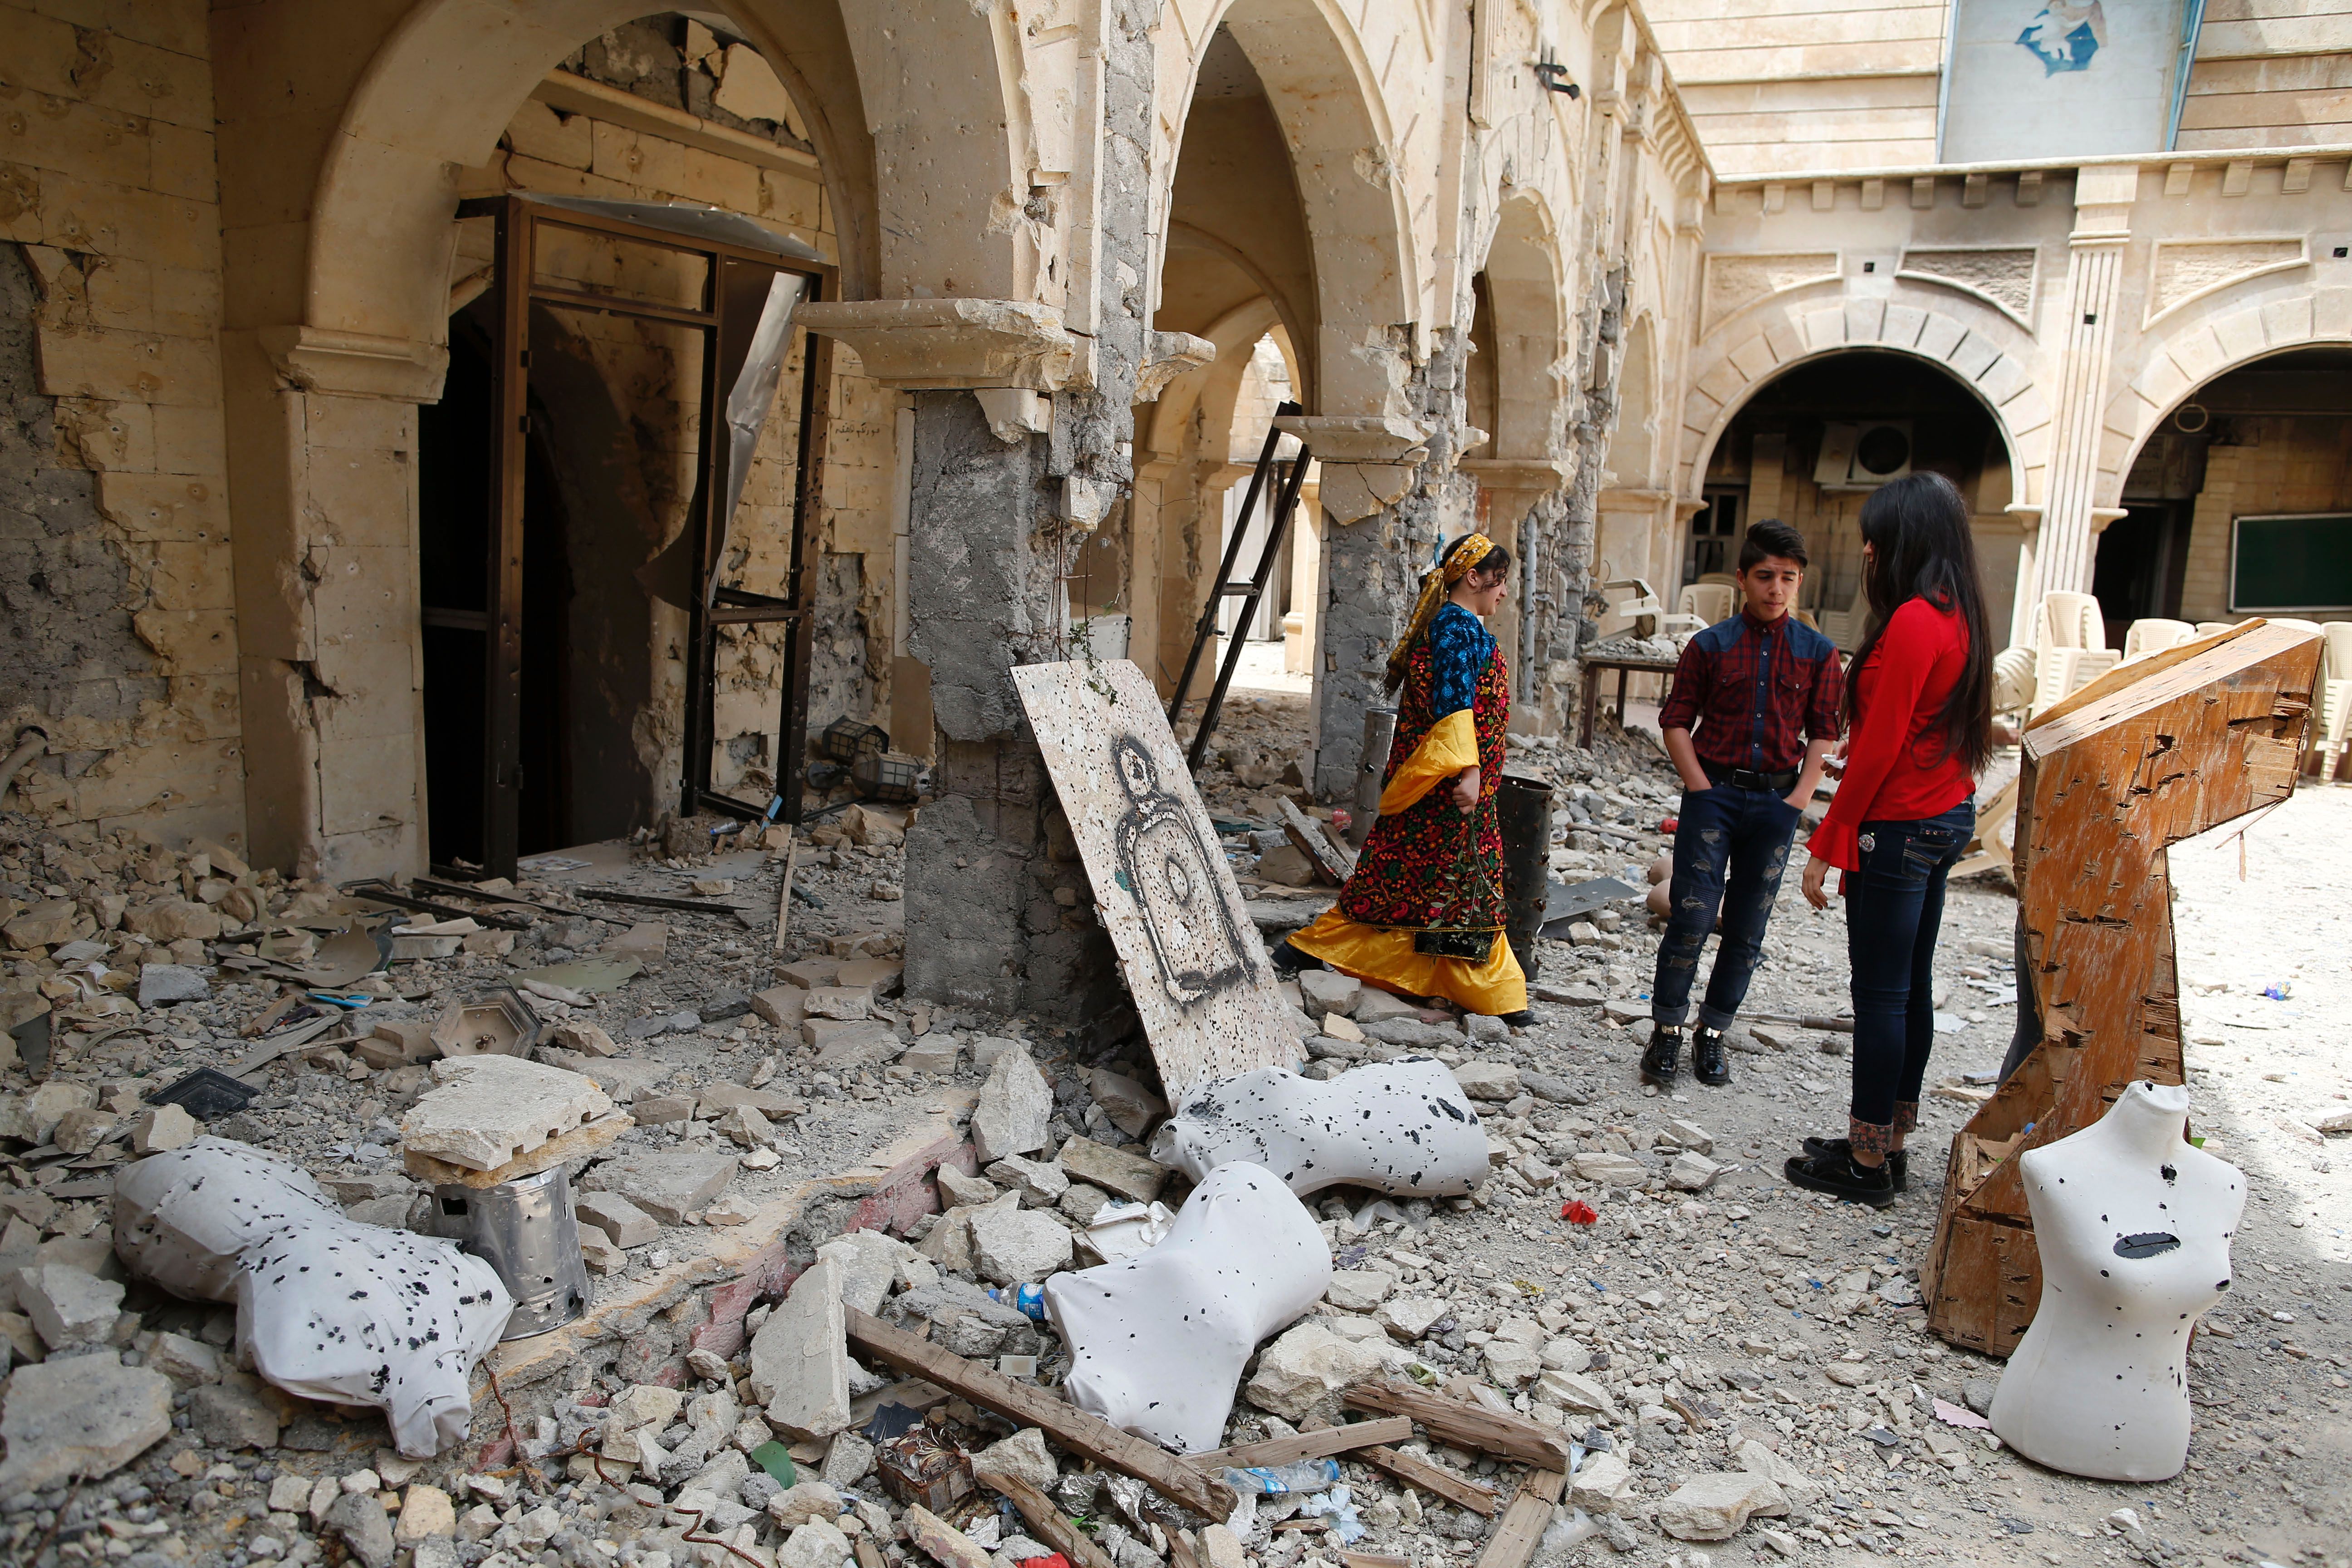 Iraqi Christian residents of Qaraqosh (also known as Hamdaniya), some 30 kilometres east of Mosul, visit the heavily damaged Church of the Immaculate Conception (AHMAD GHARABLI/AFP via Getty Images)